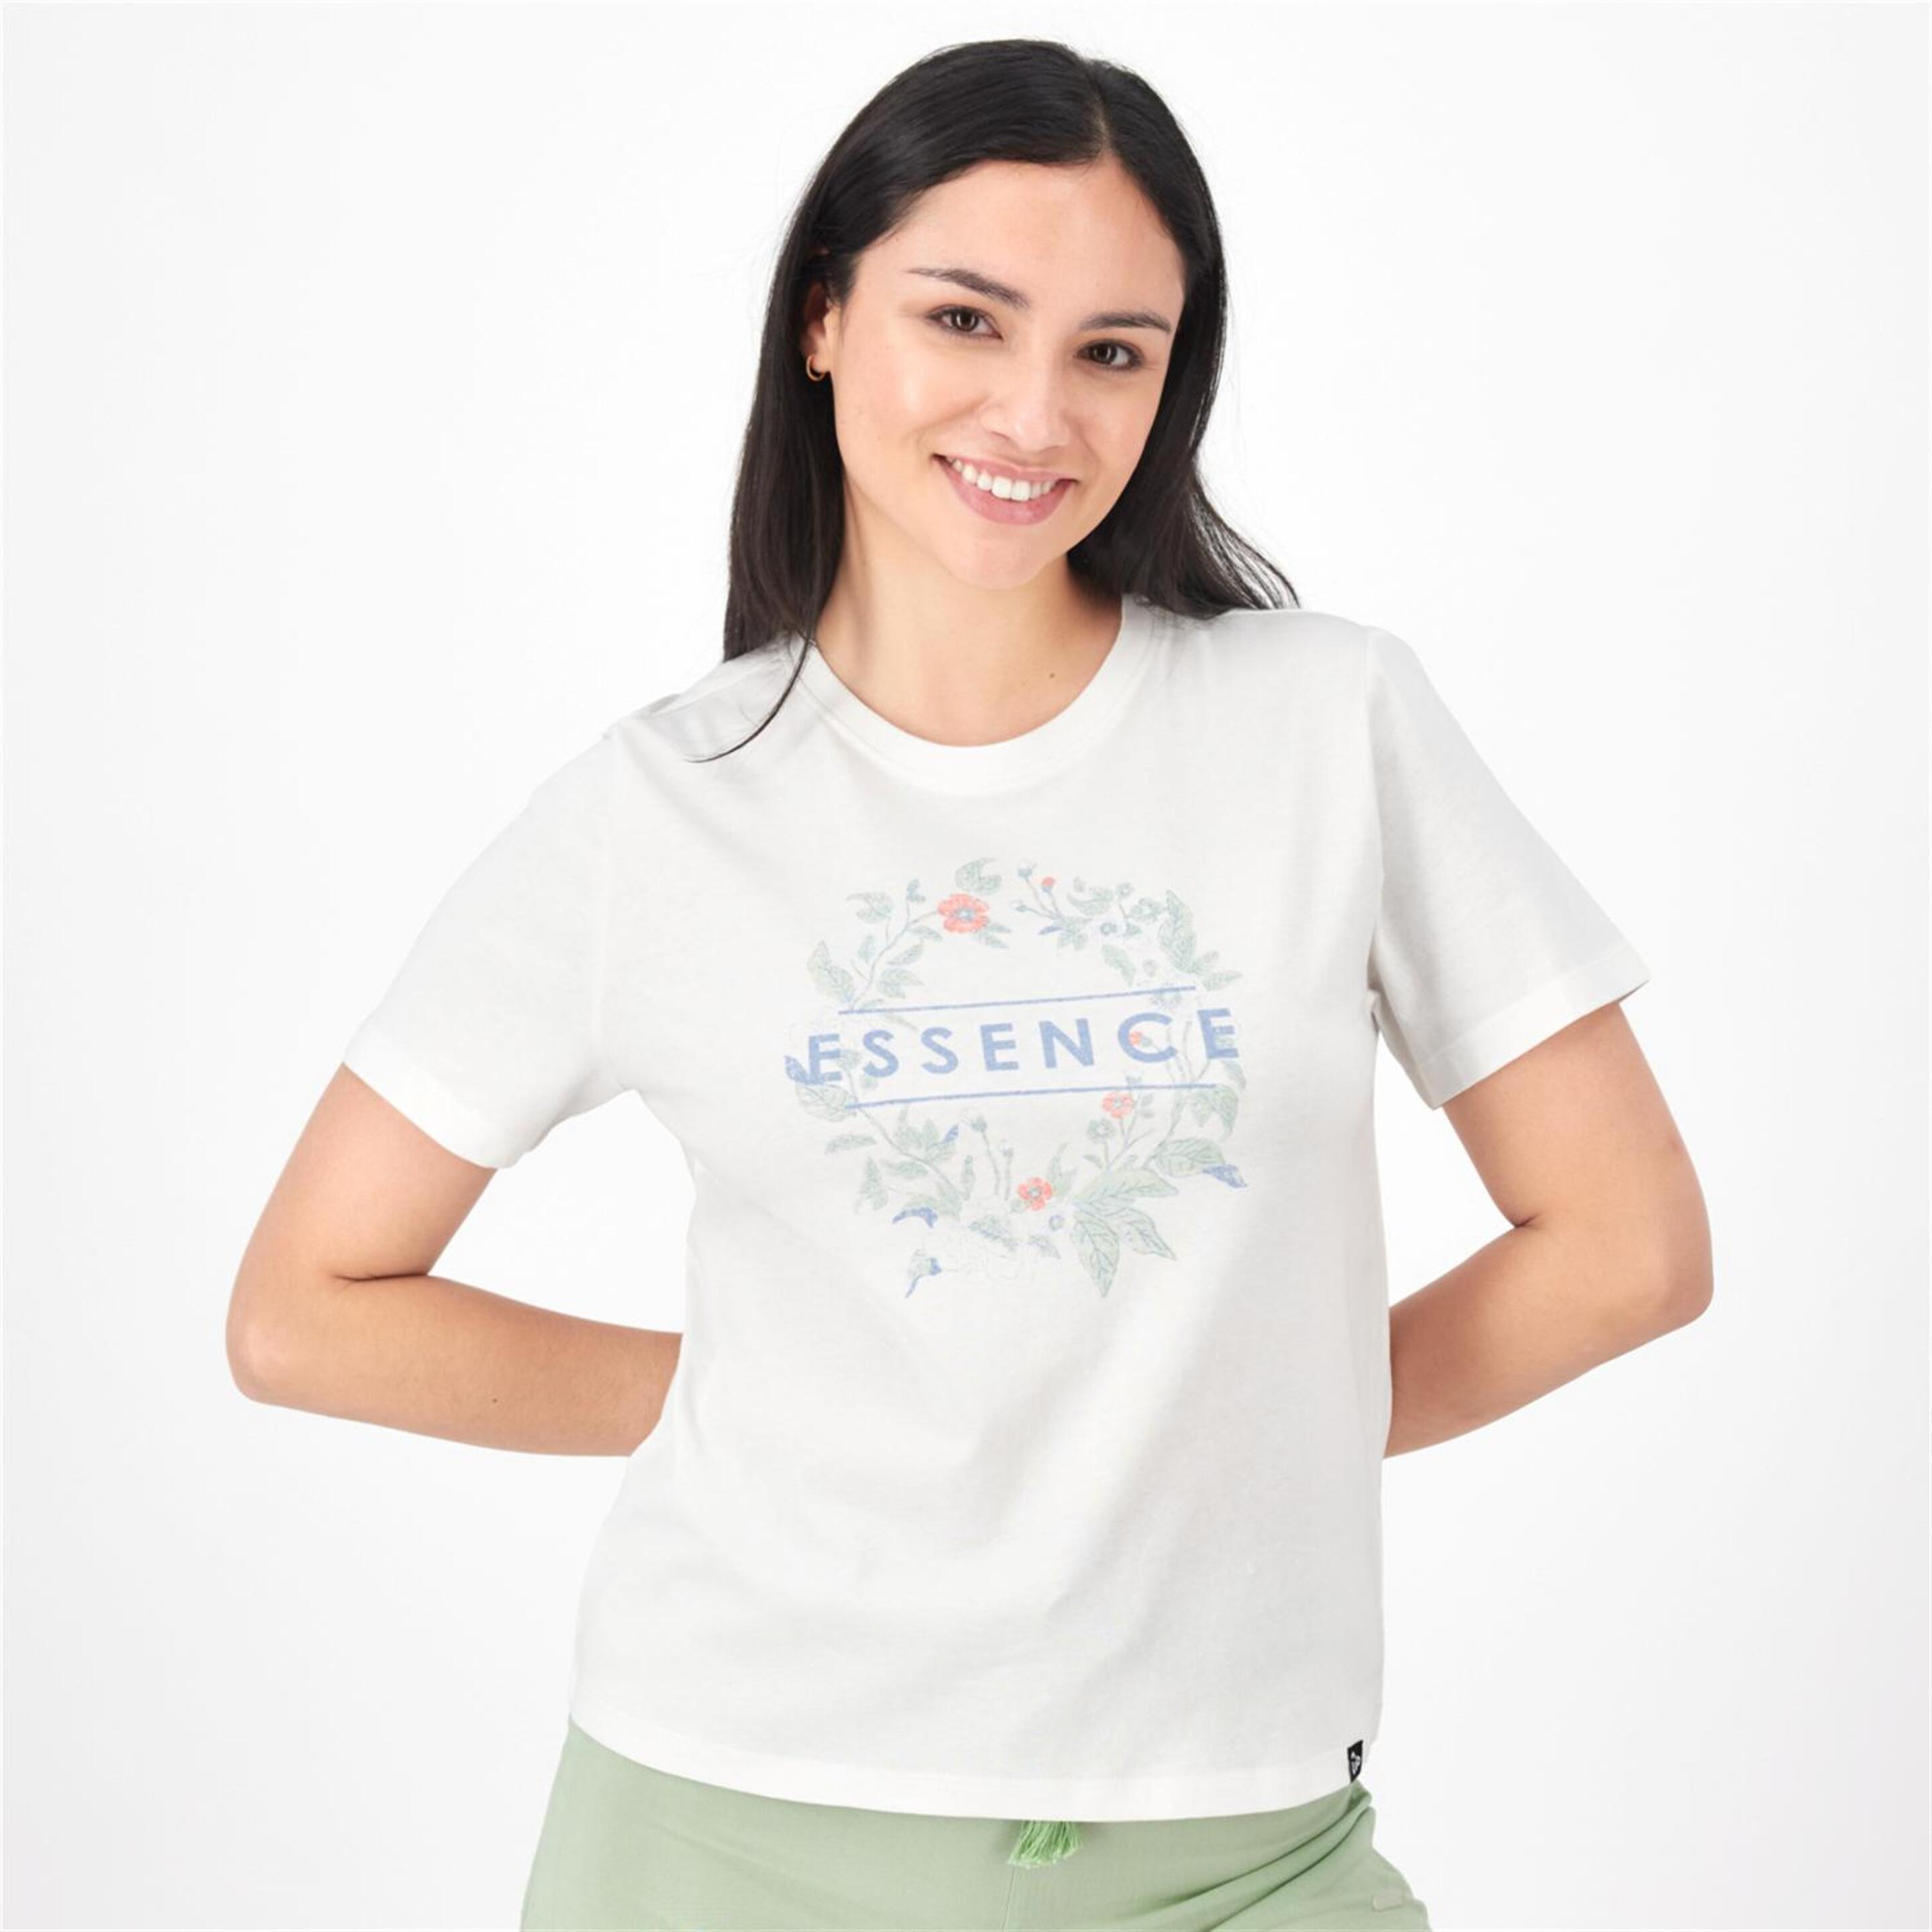 Up Stamps - blanco - Camiseta Mujer